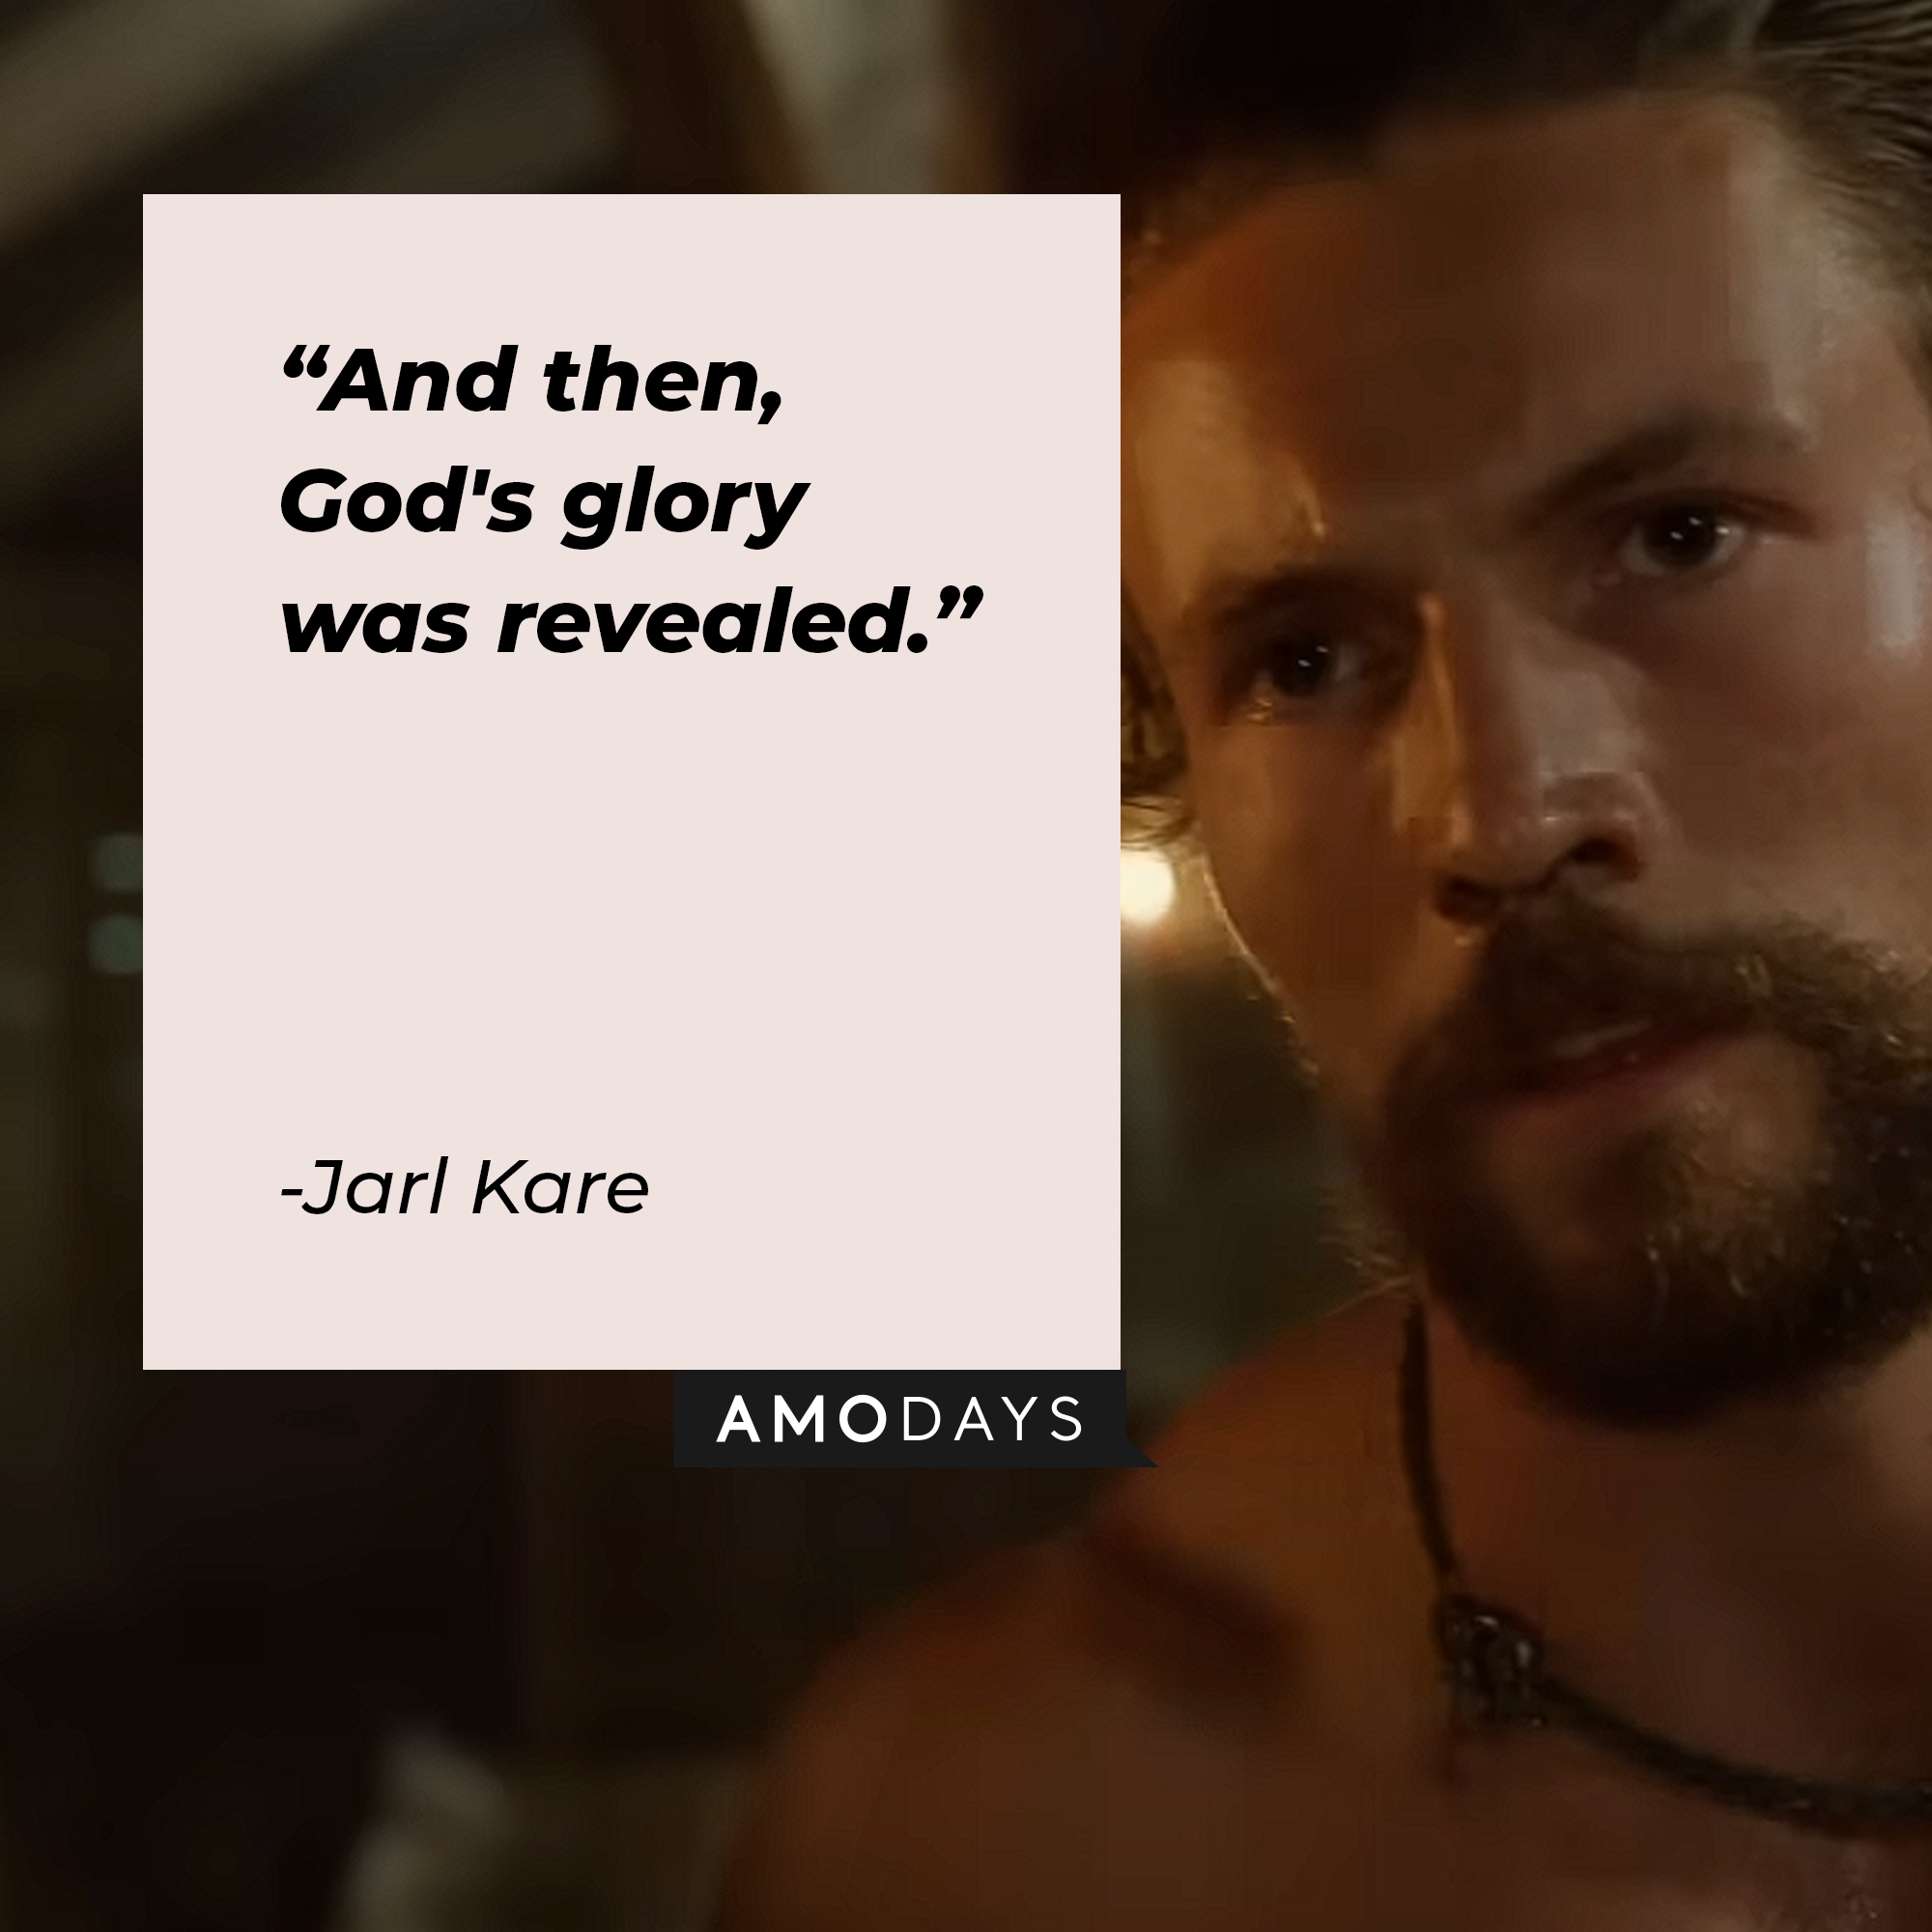 Jarl Kare's quote: "And then, God's glory was revealed." | Image: youtube.com/Netflix